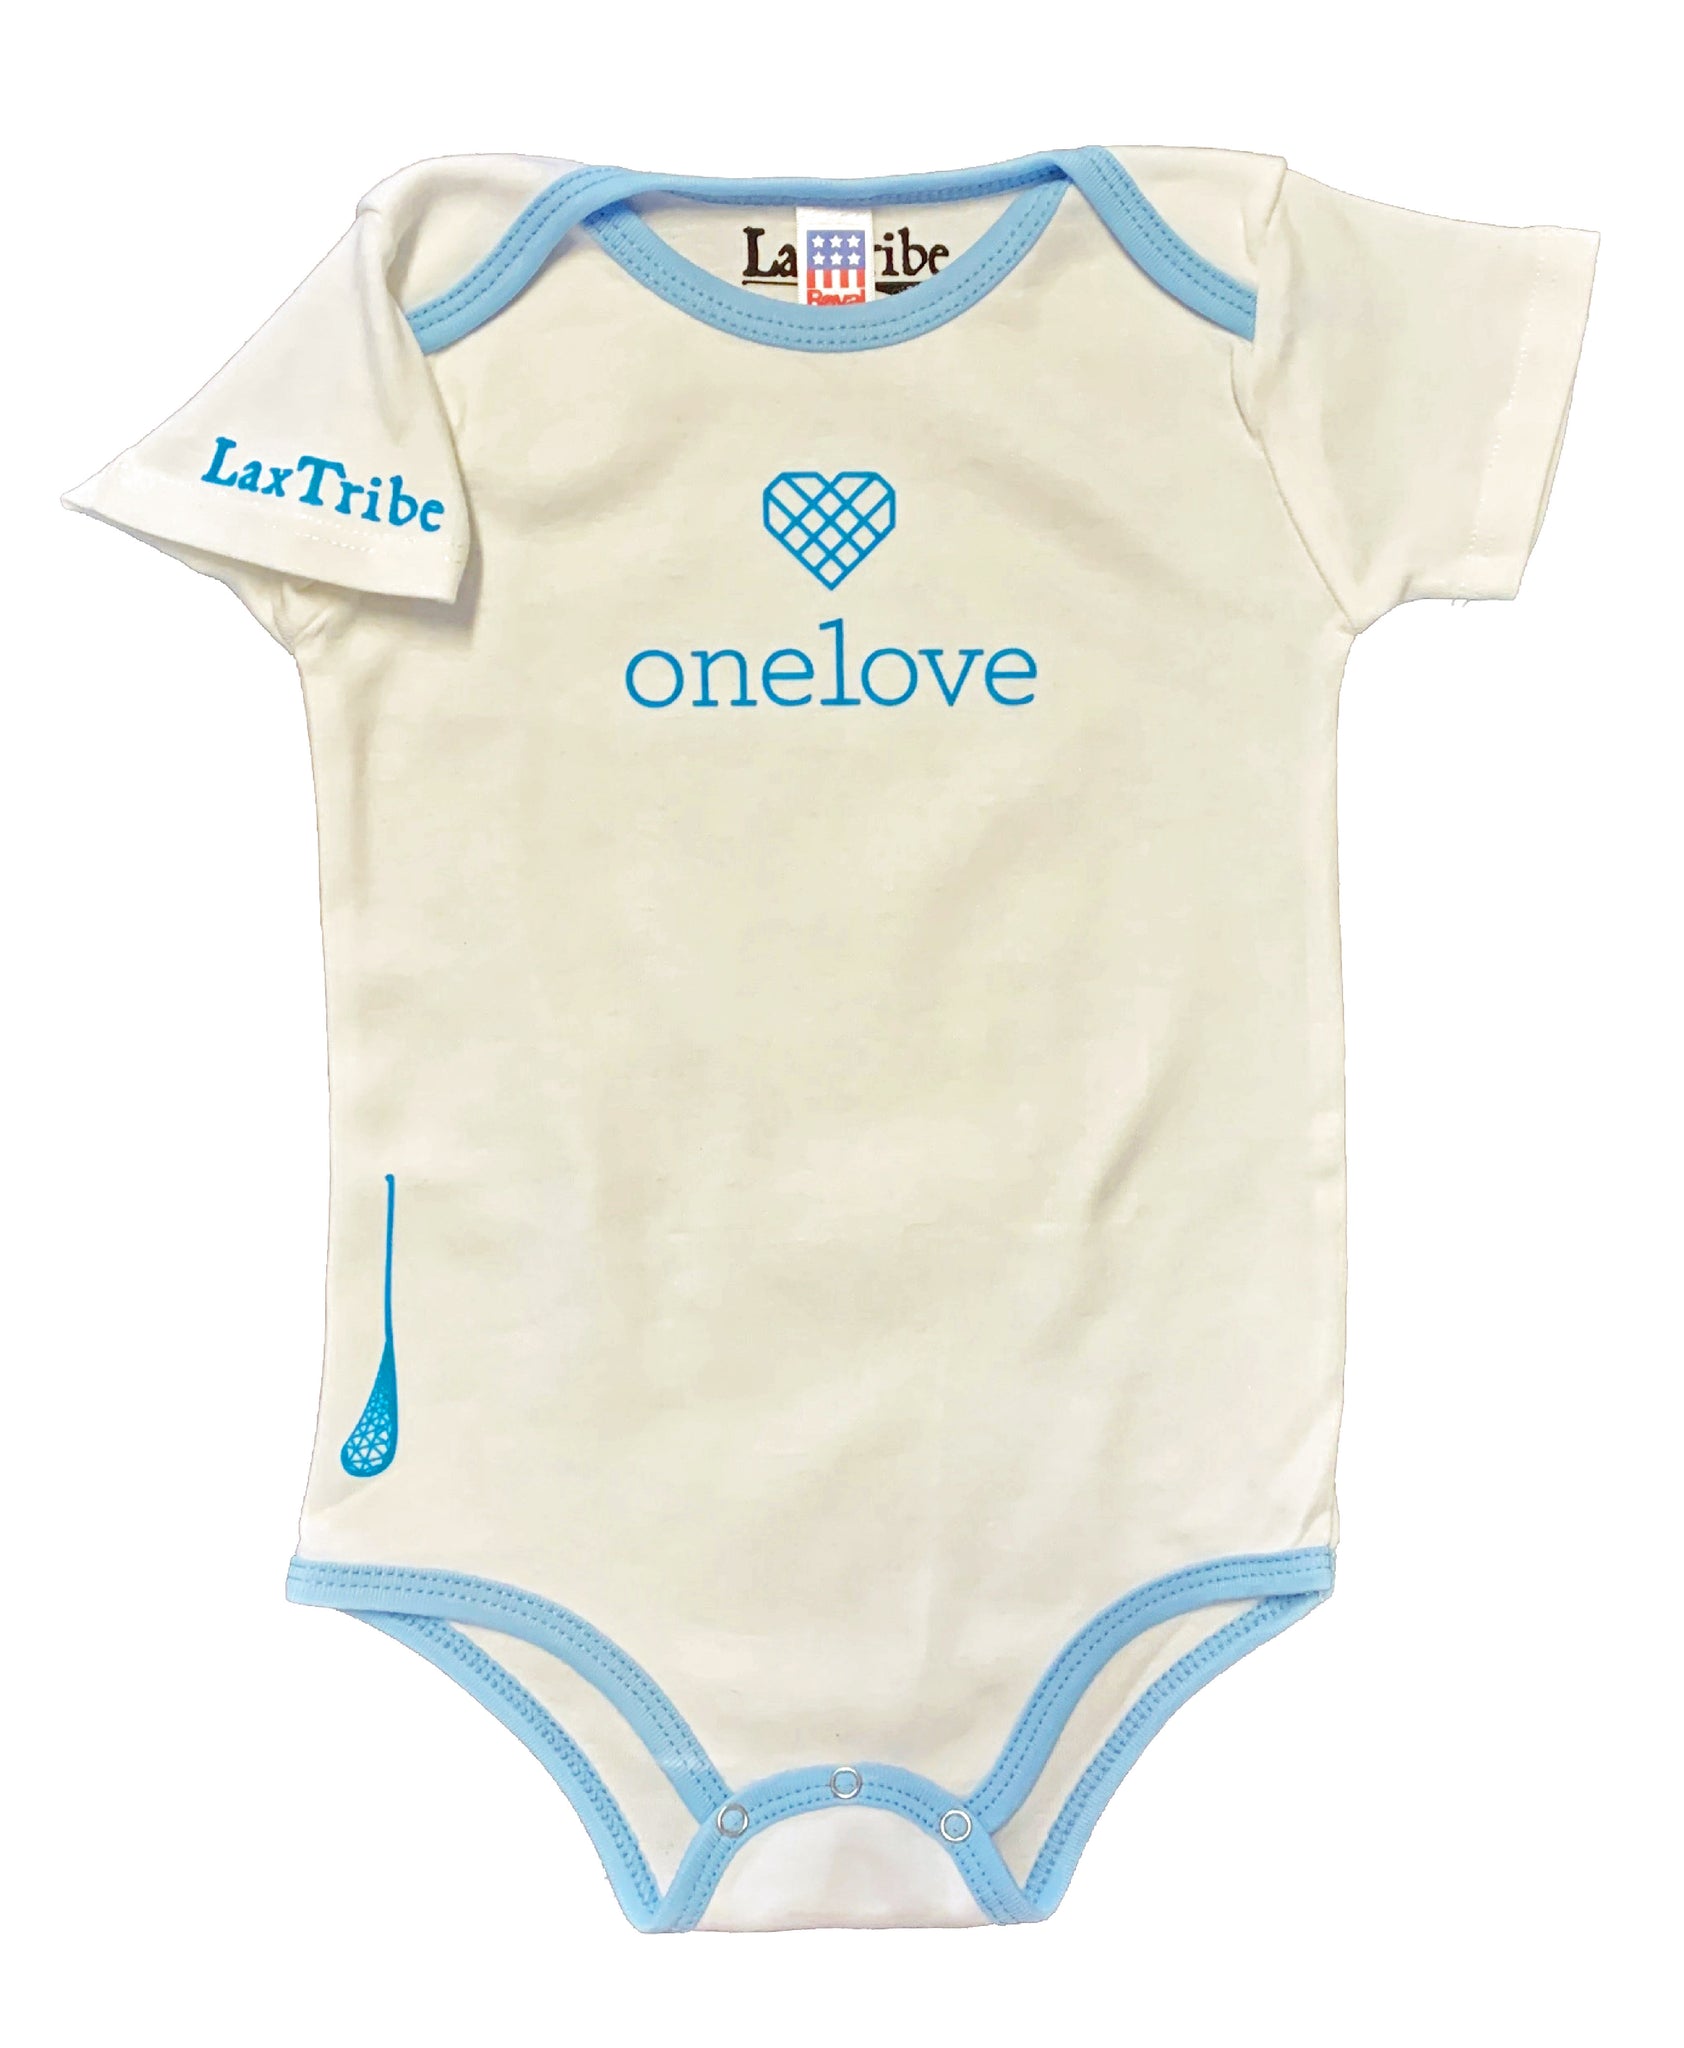 One Love Onesie - 100% Certified Organic - MADE in USA - Size: 12 month